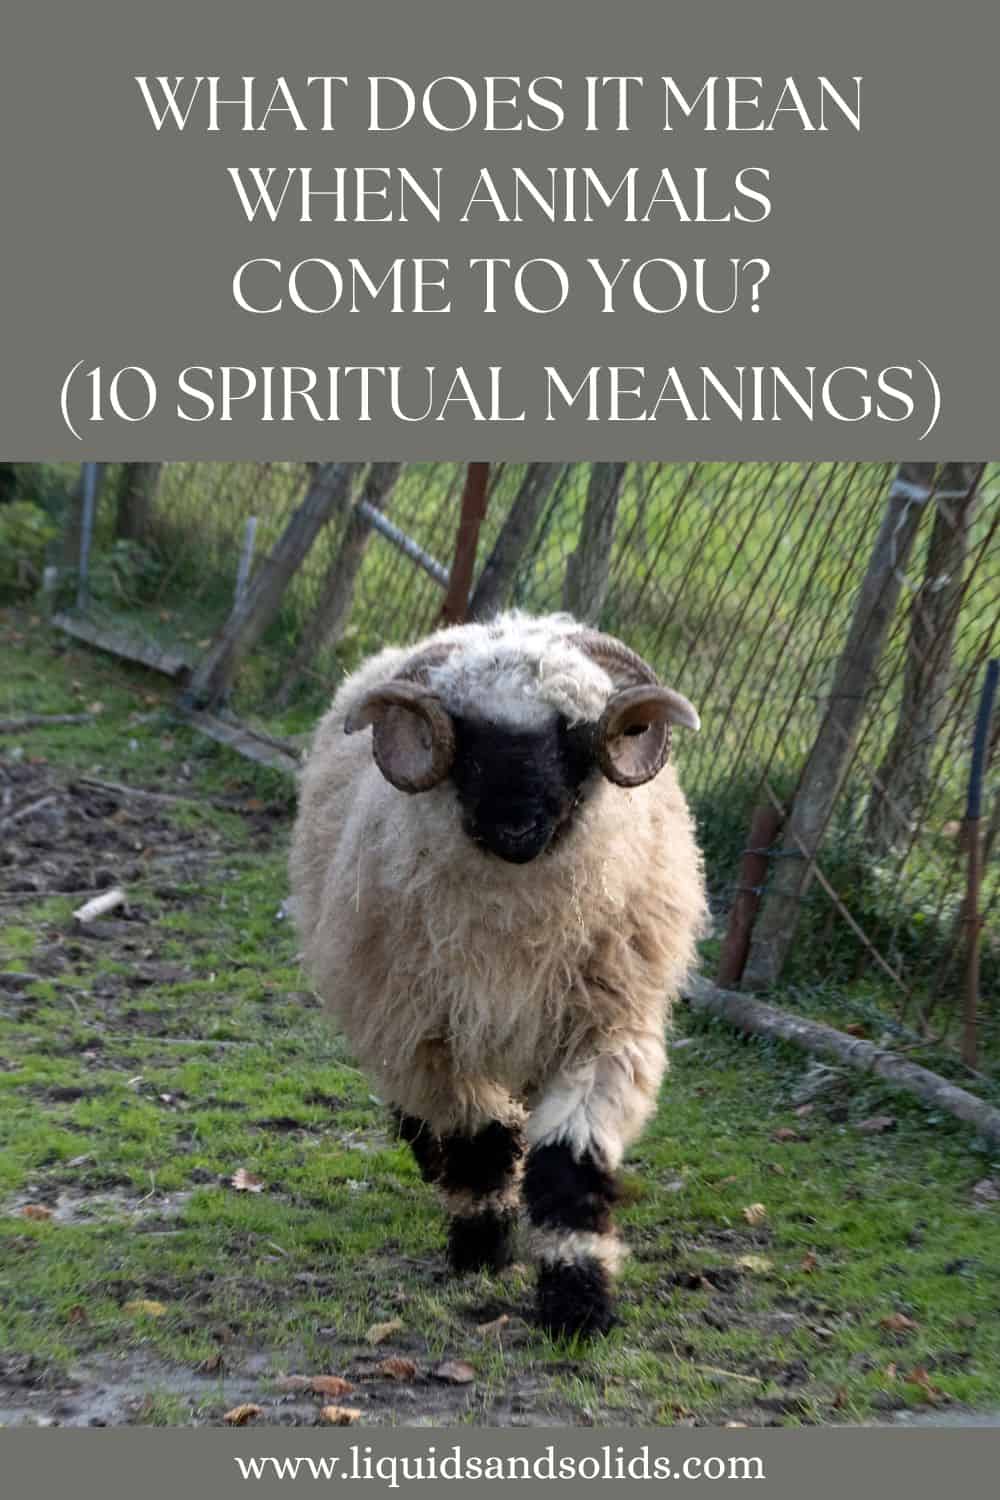 What Does It Mean When Animals Come To You? (10 Spiritual Meanings)